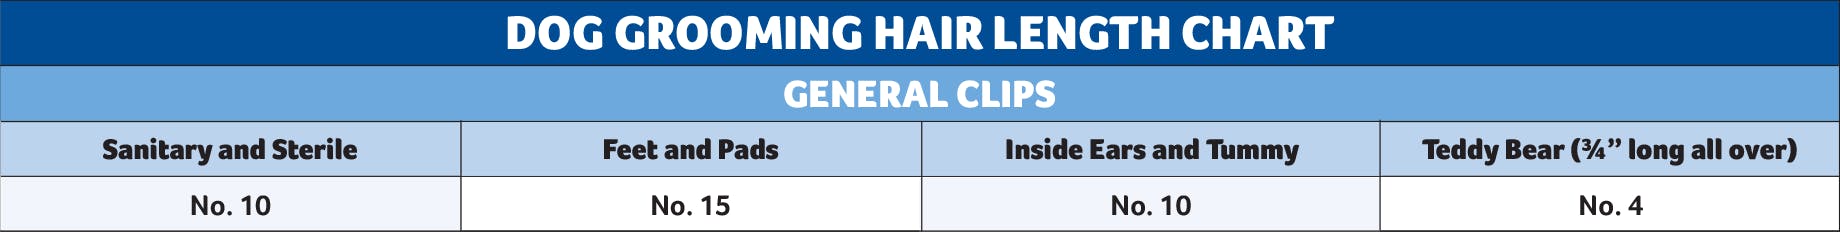 Dog grooming hair length chart - General clips